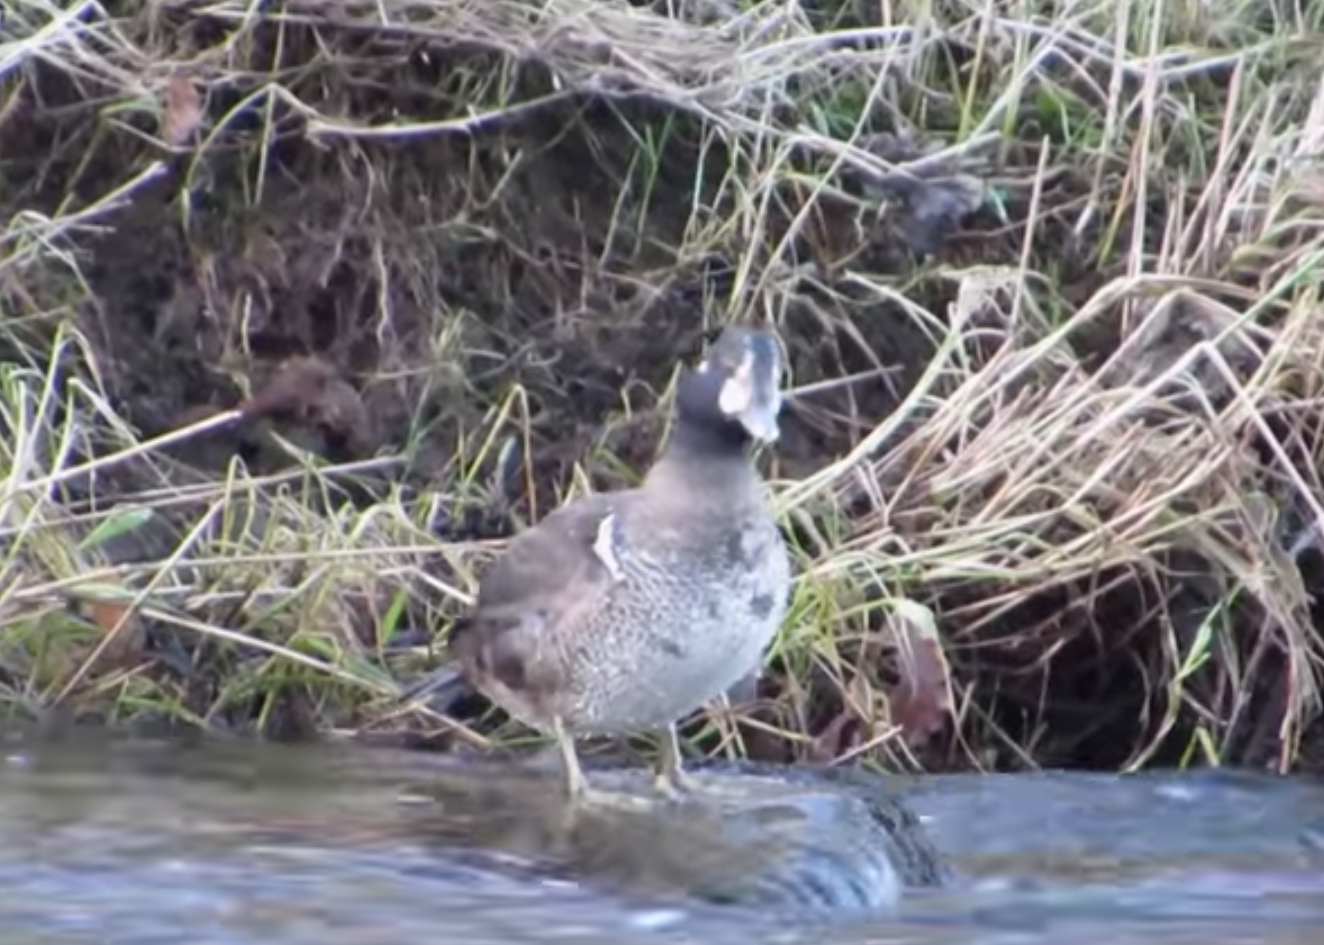 Glimpses of the rare duck have been captured on video